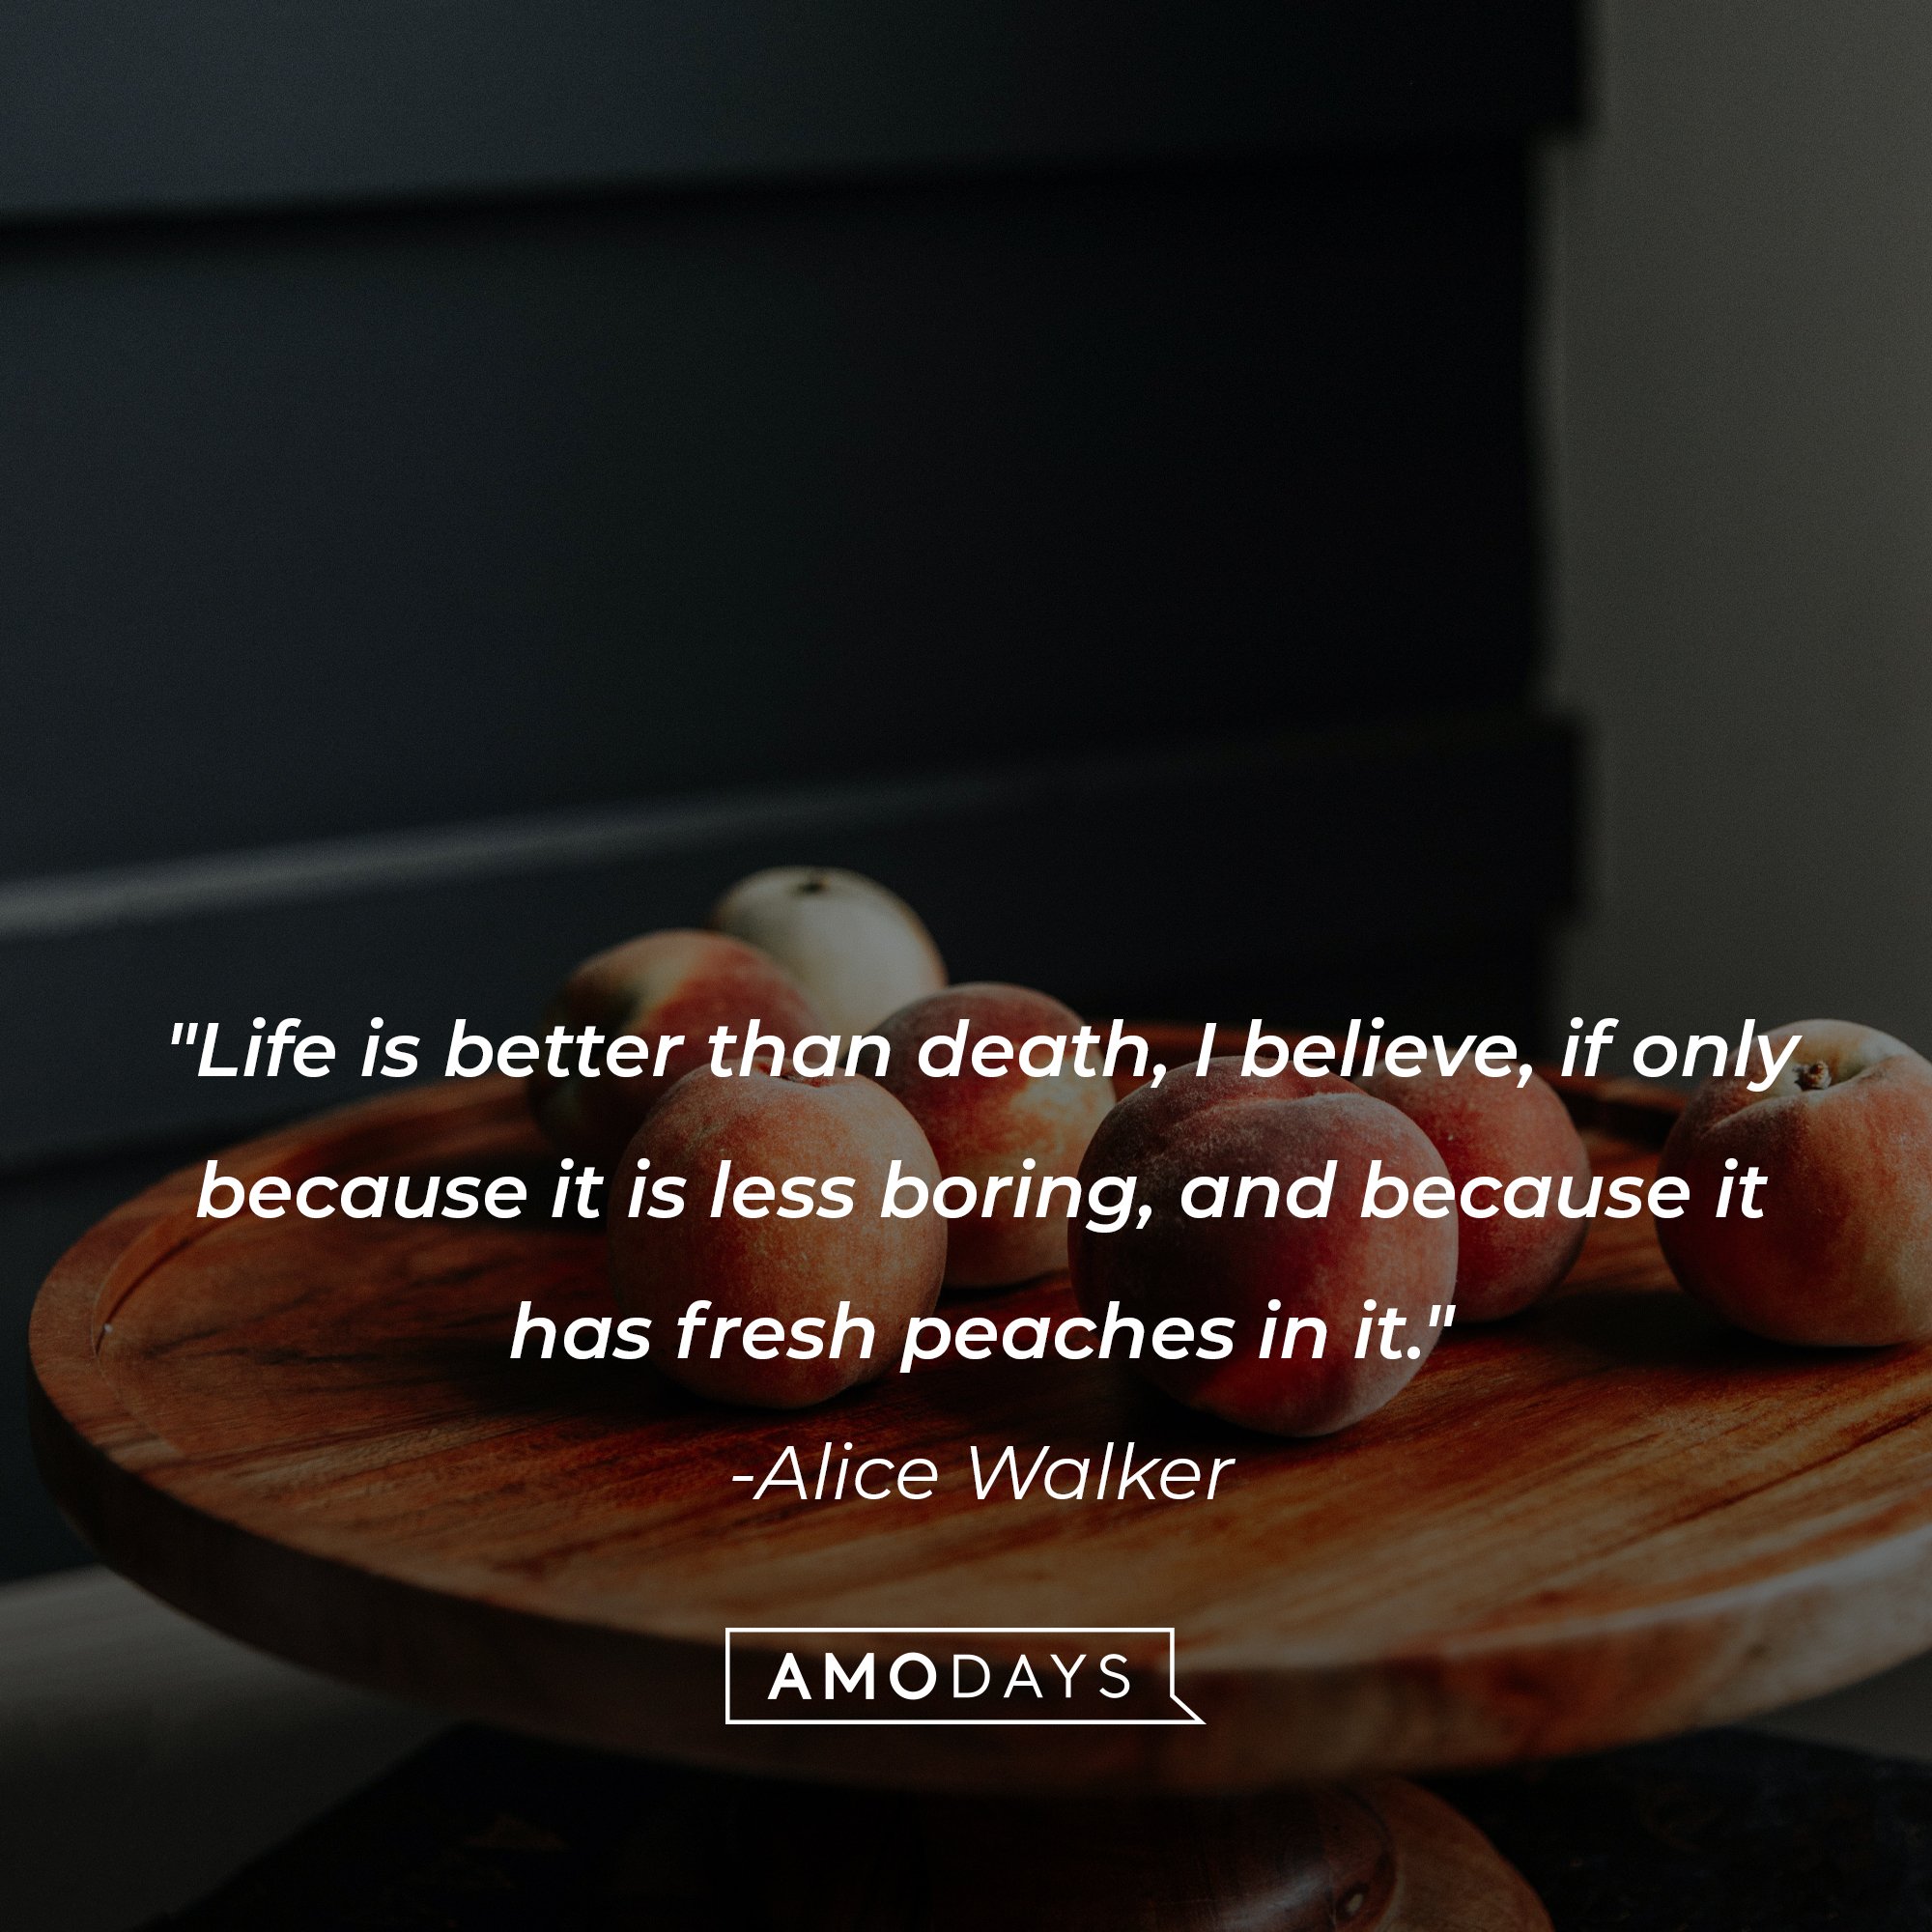 Alice Walker's quote: "Life is better than death, I believe, if only because it is less boring, and because it has fresh peaches in it." | Image: AmoDays